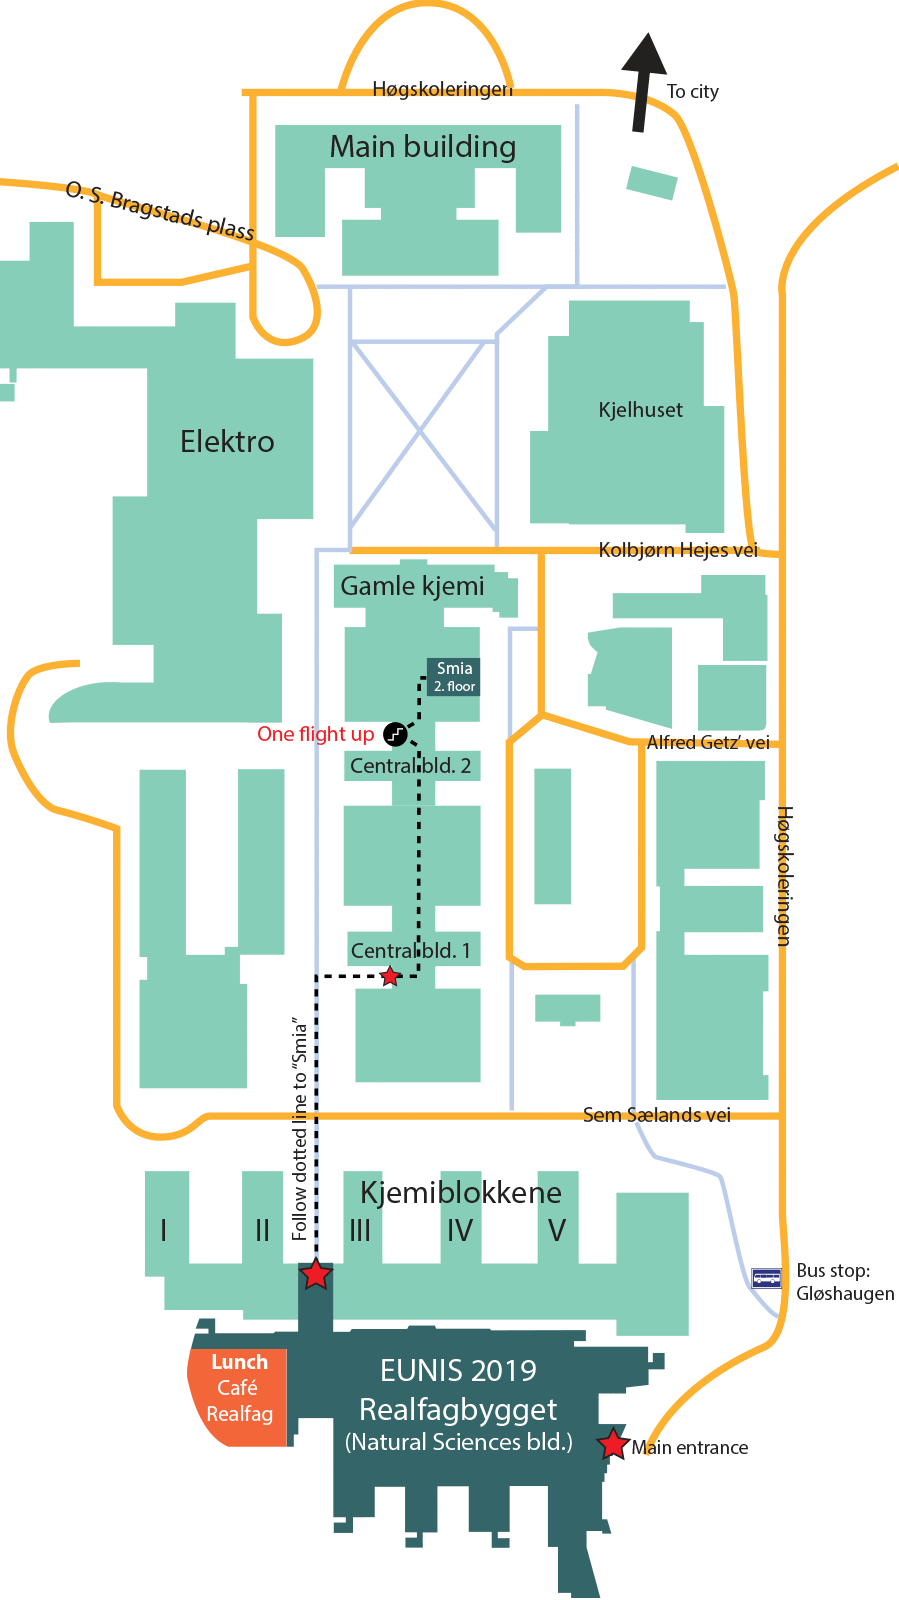 Map over NTNU Gloeshaugen campus. Eunis venue, Realfagbygget, in the south end of campus. the room "Smia" is marked in the second floor of central builing 2 located in the center of campus..